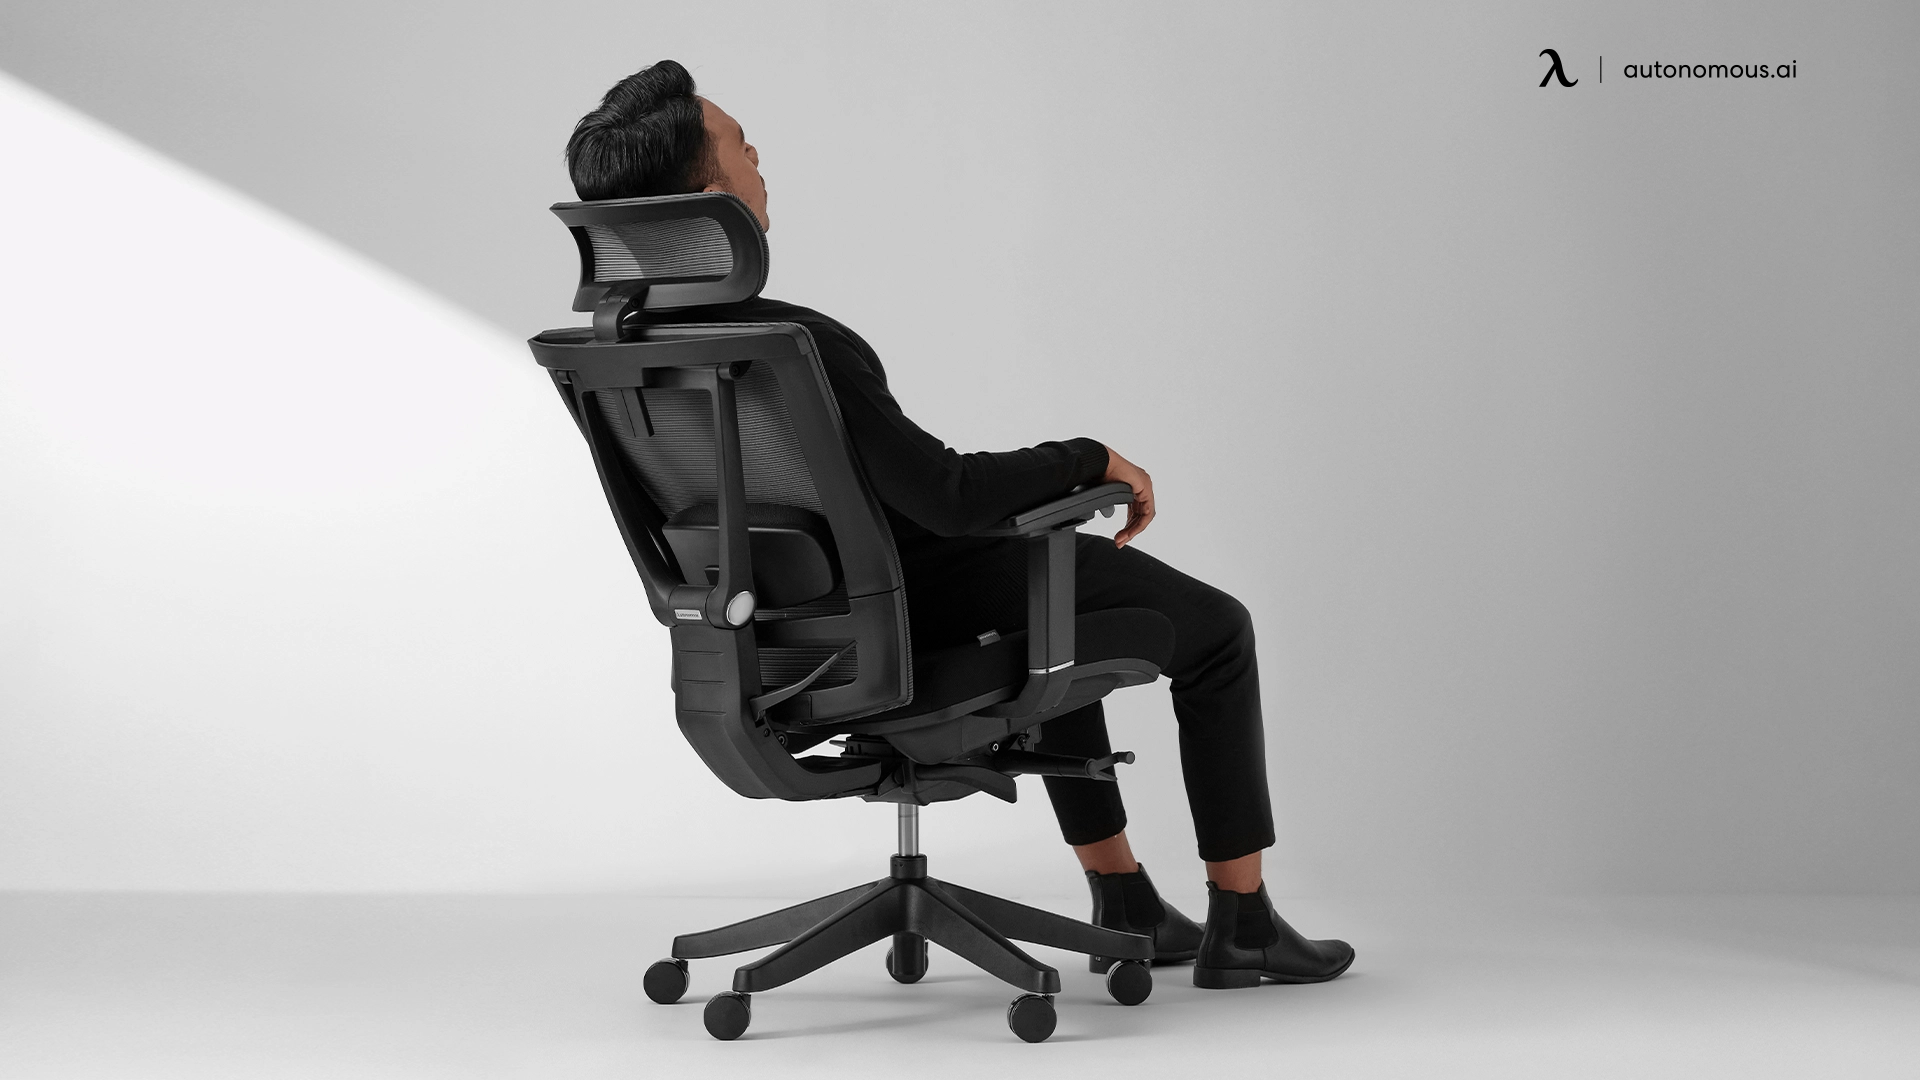 What Is a Multi-purpose Office Chair?